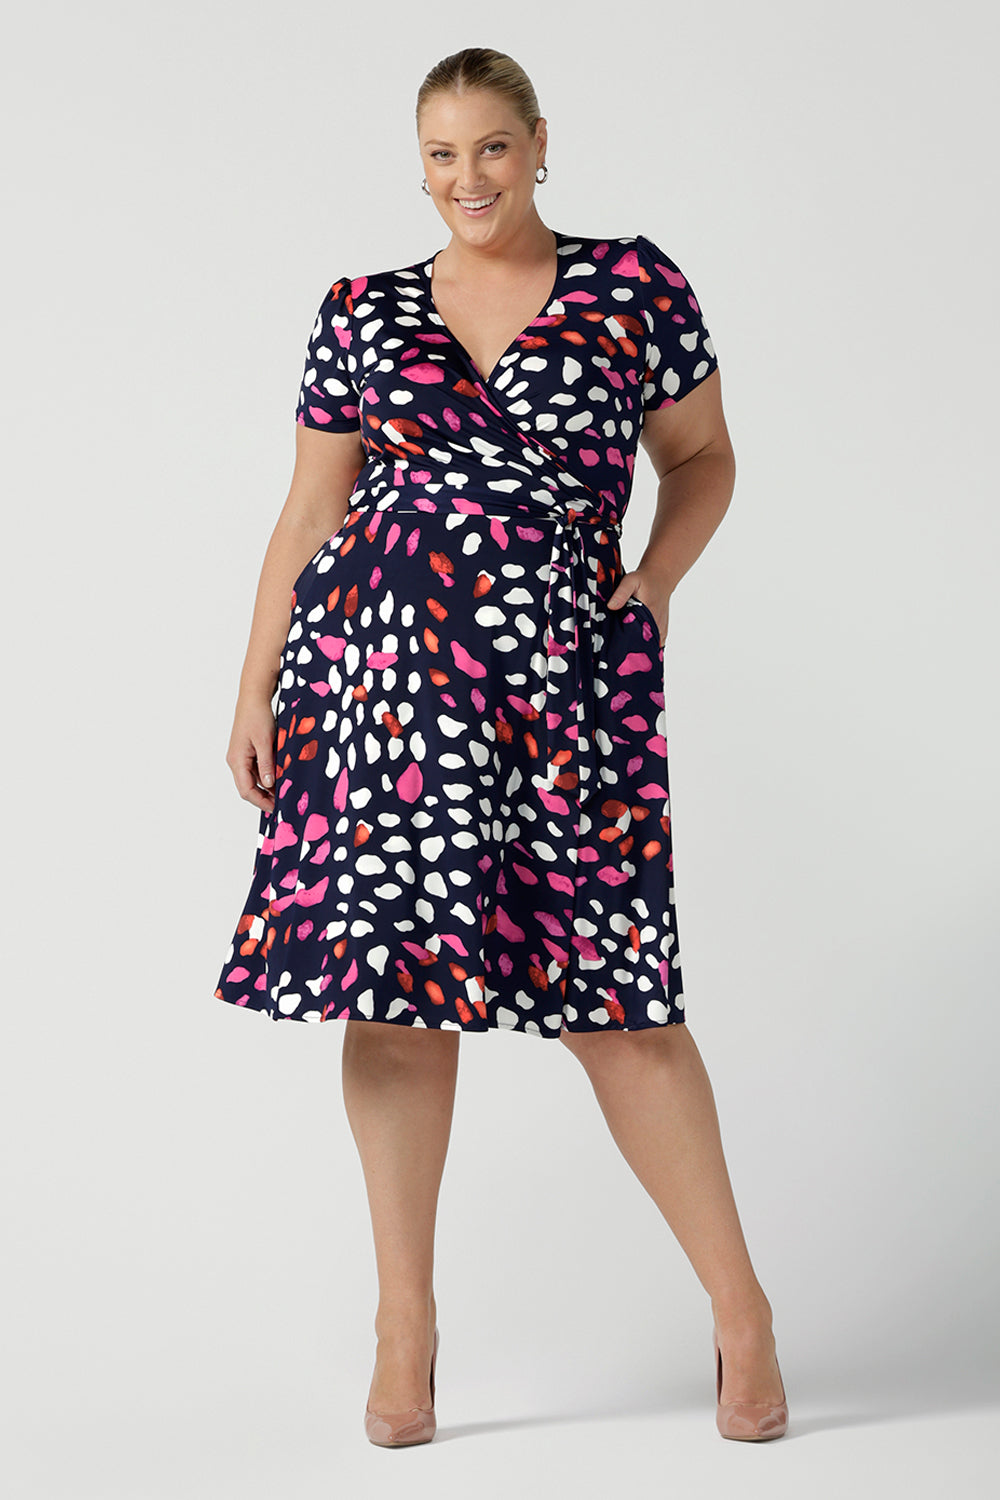 A curvy, size 18 woman wearing a abstract jersey print, knee length wrap dress with short sleeves. A great dress for summer casual wear, or for travel. Shop made in Australia dresses in sizes 8-24 online at Australian fashion brand, Leina & Fleur.